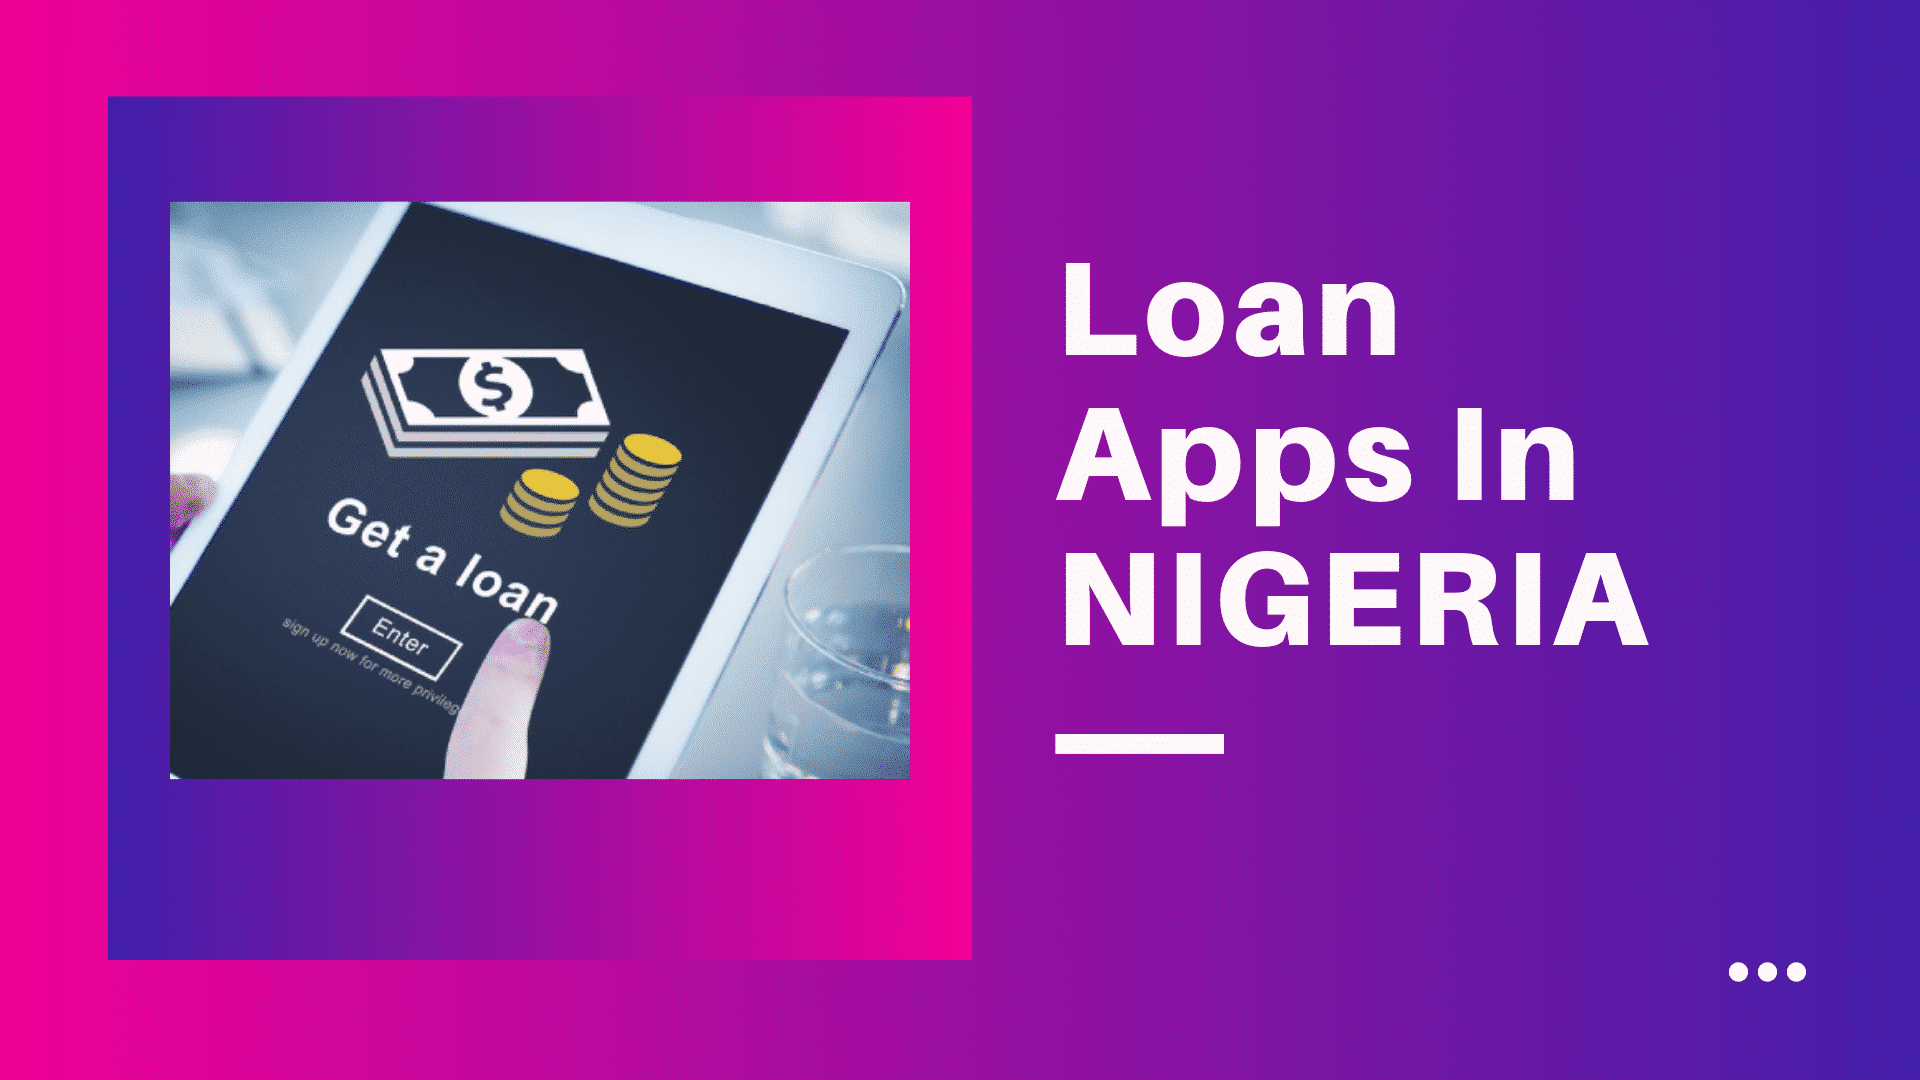 What is the loan app in Nigeria?